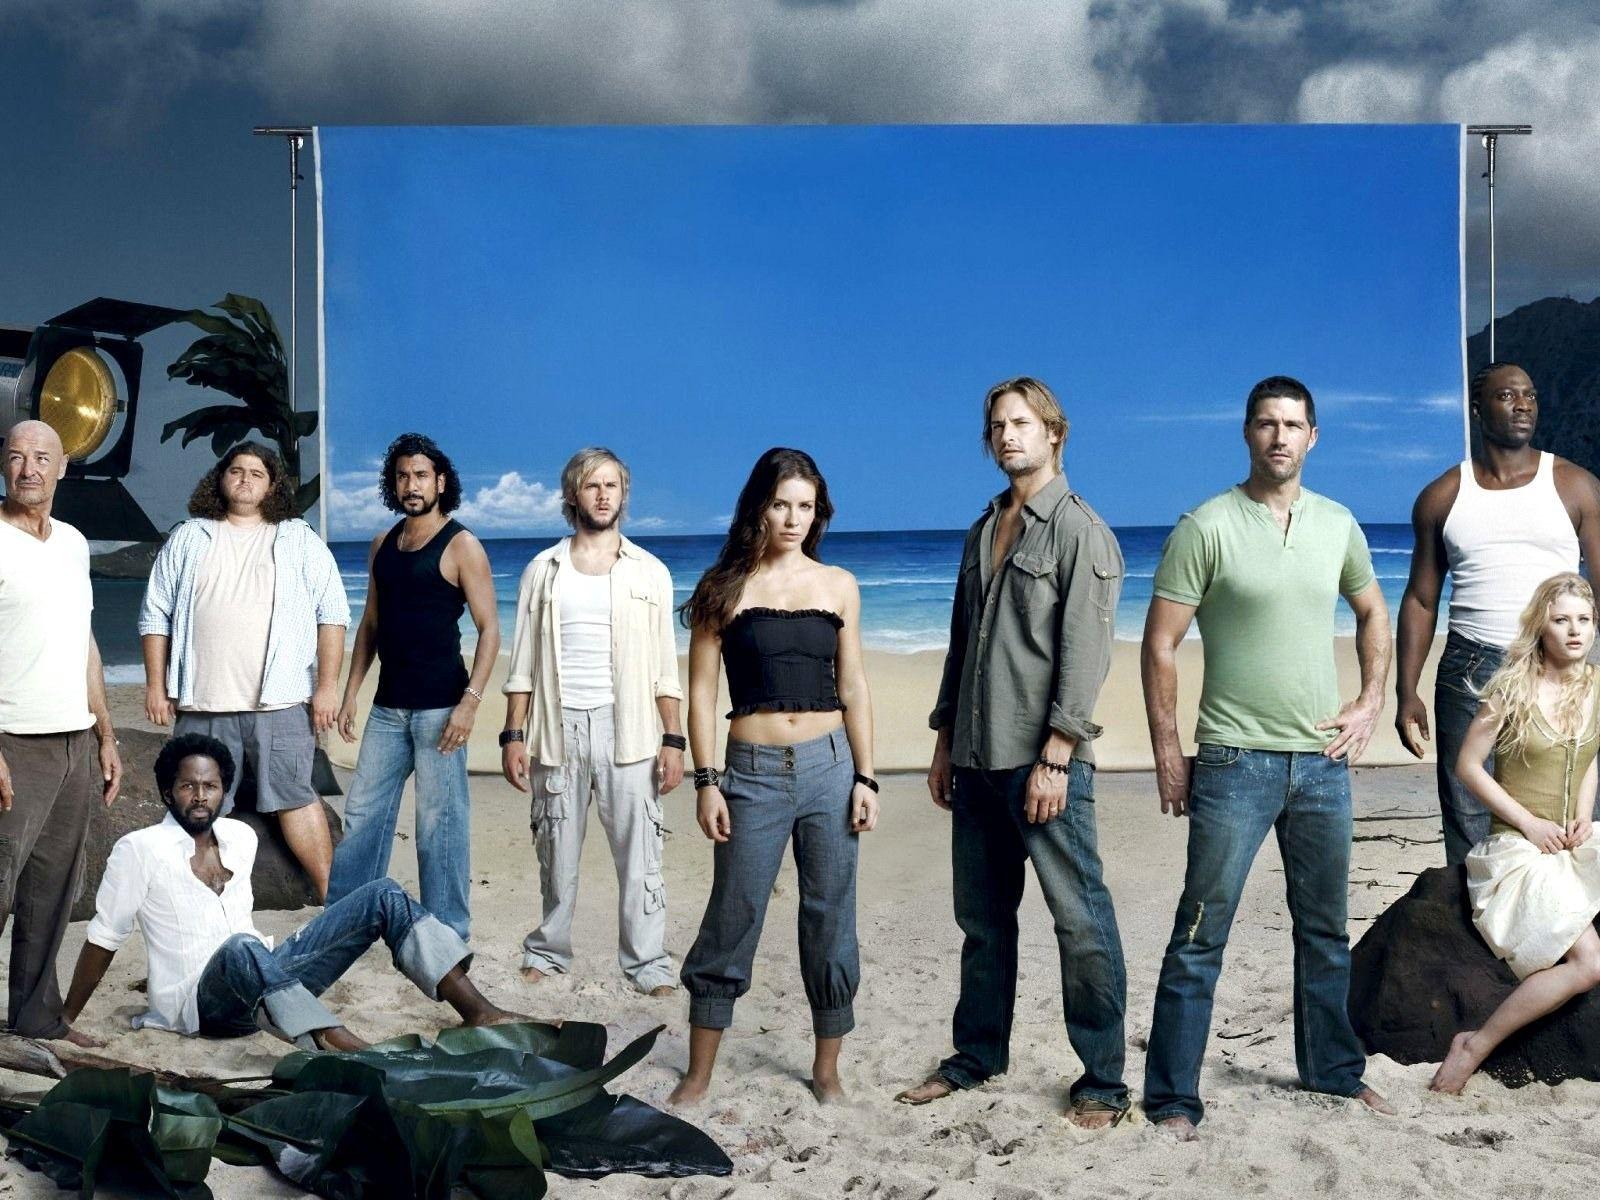 Lost TV show Wallpaper Lost Movies Wallpaper in jpg format for free download